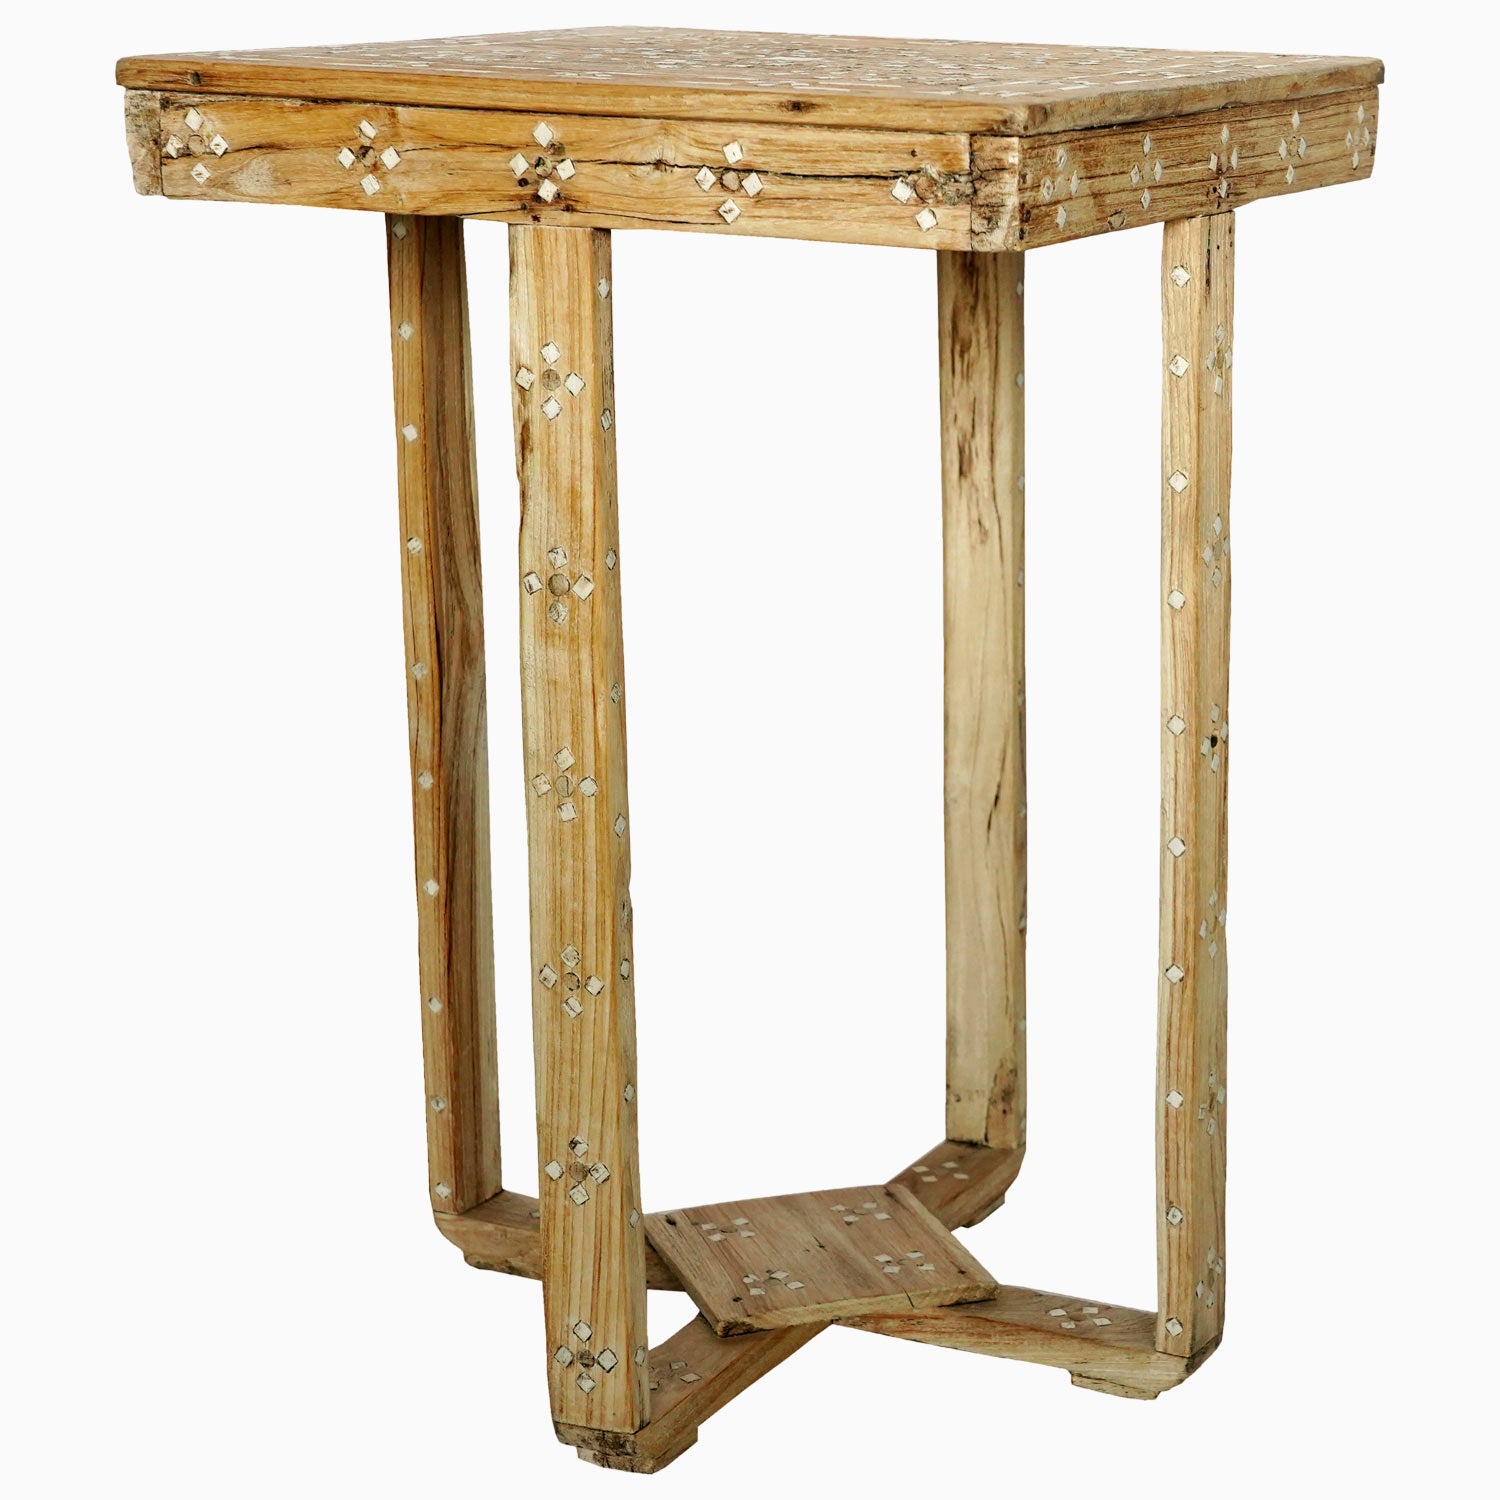 Square Wooden Inlay Table Main